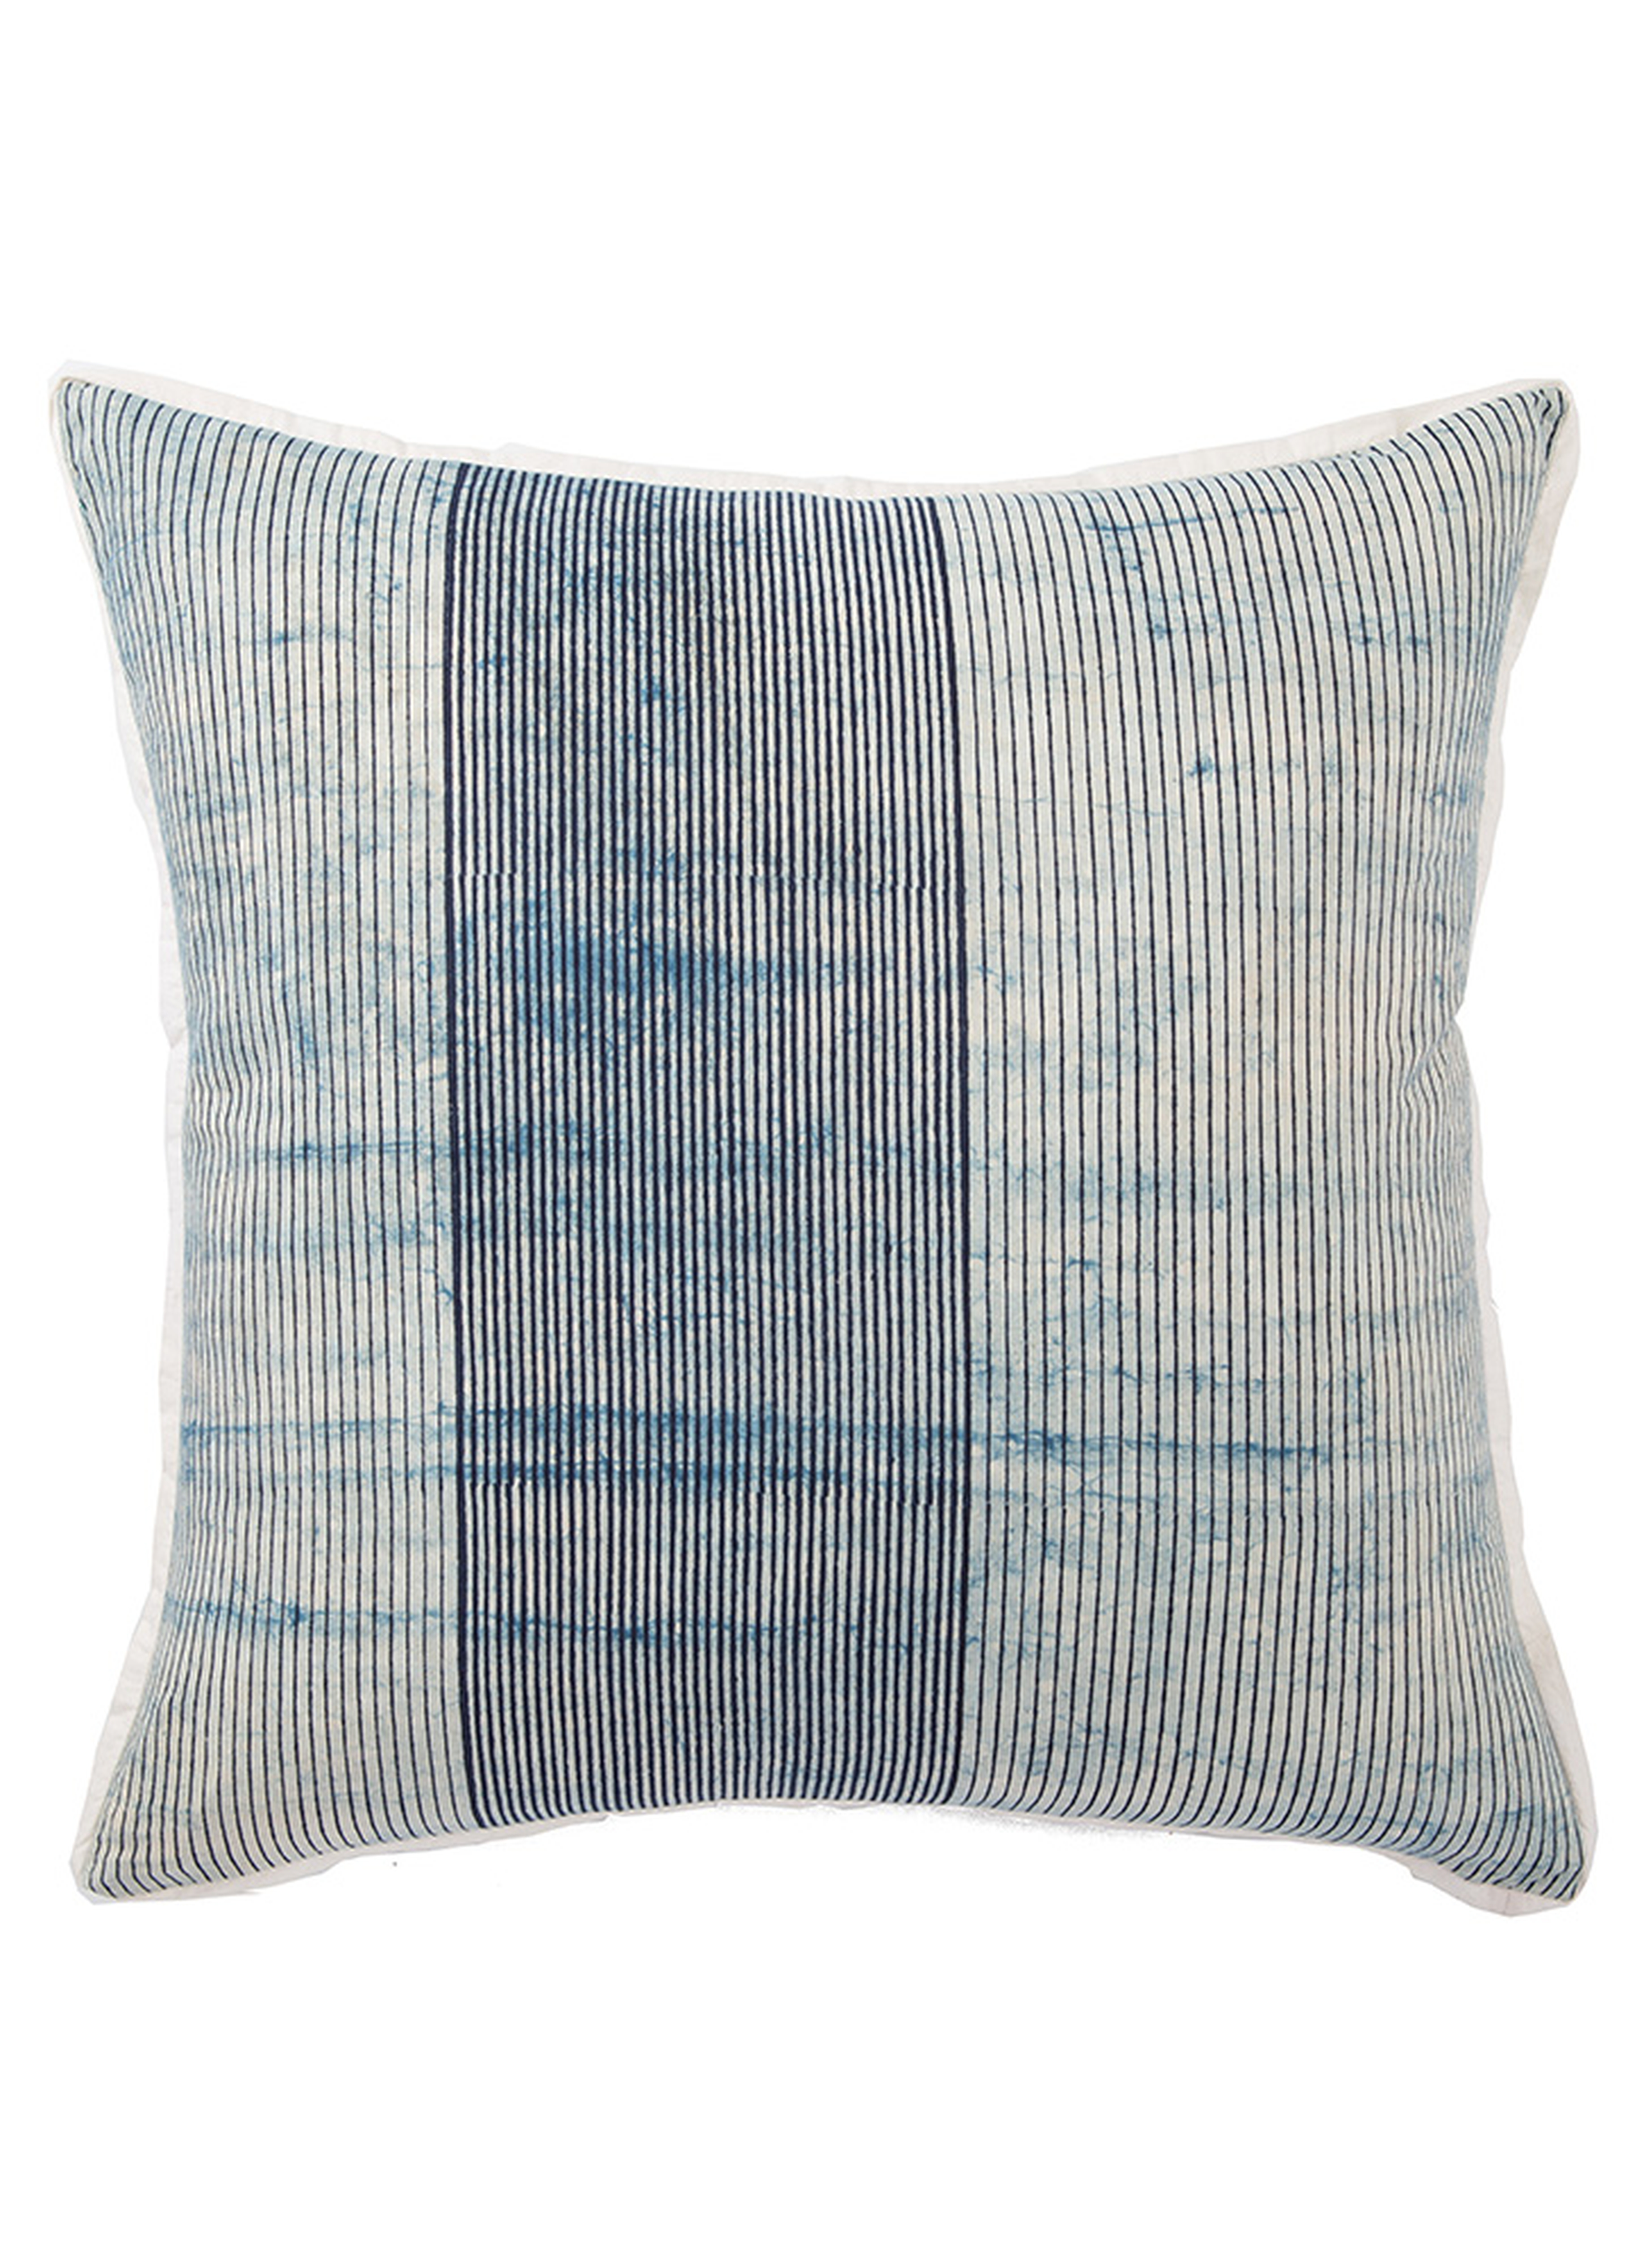 Alicia Pillow - Down Insert - Collective Weavers